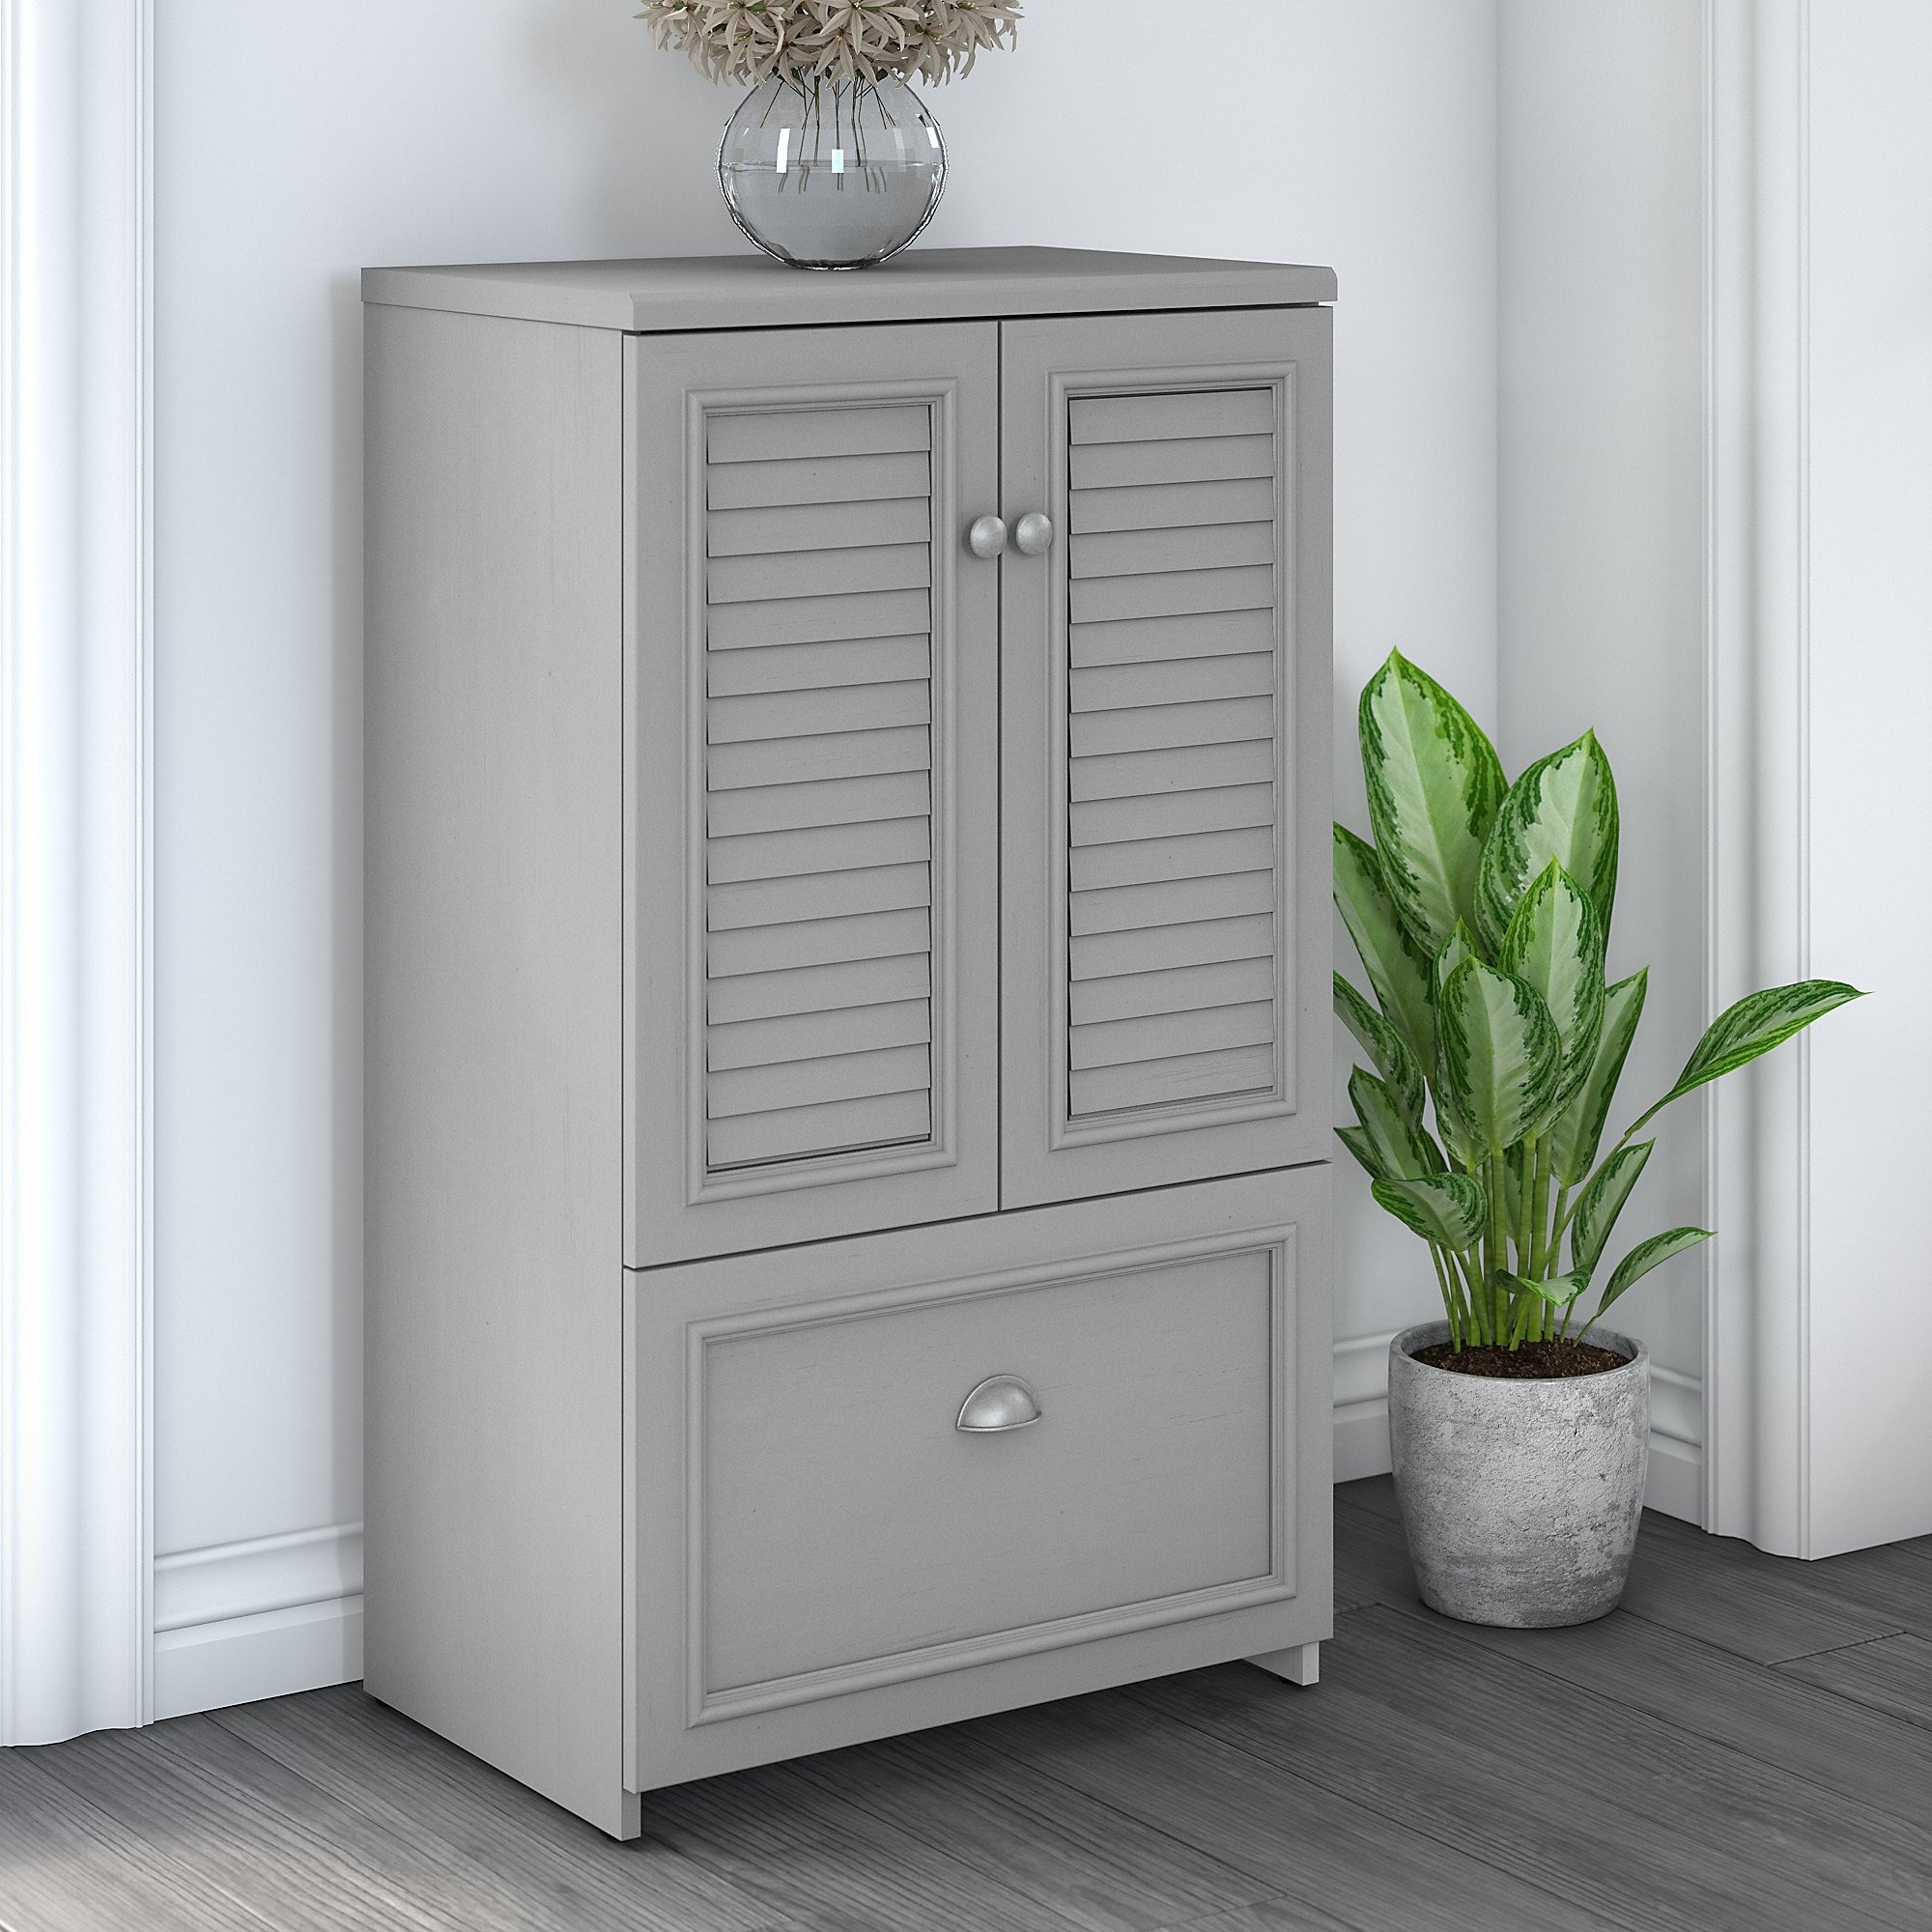 https://ak1.ostkcdn.com/images/products/is/images/direct/b64afc8472eb4a231cdec6c372ee5a7fb3a73fab/Fairview-Shoe-Storage-Cabinet-with-Doors-by-Bush-Furniture.jpg